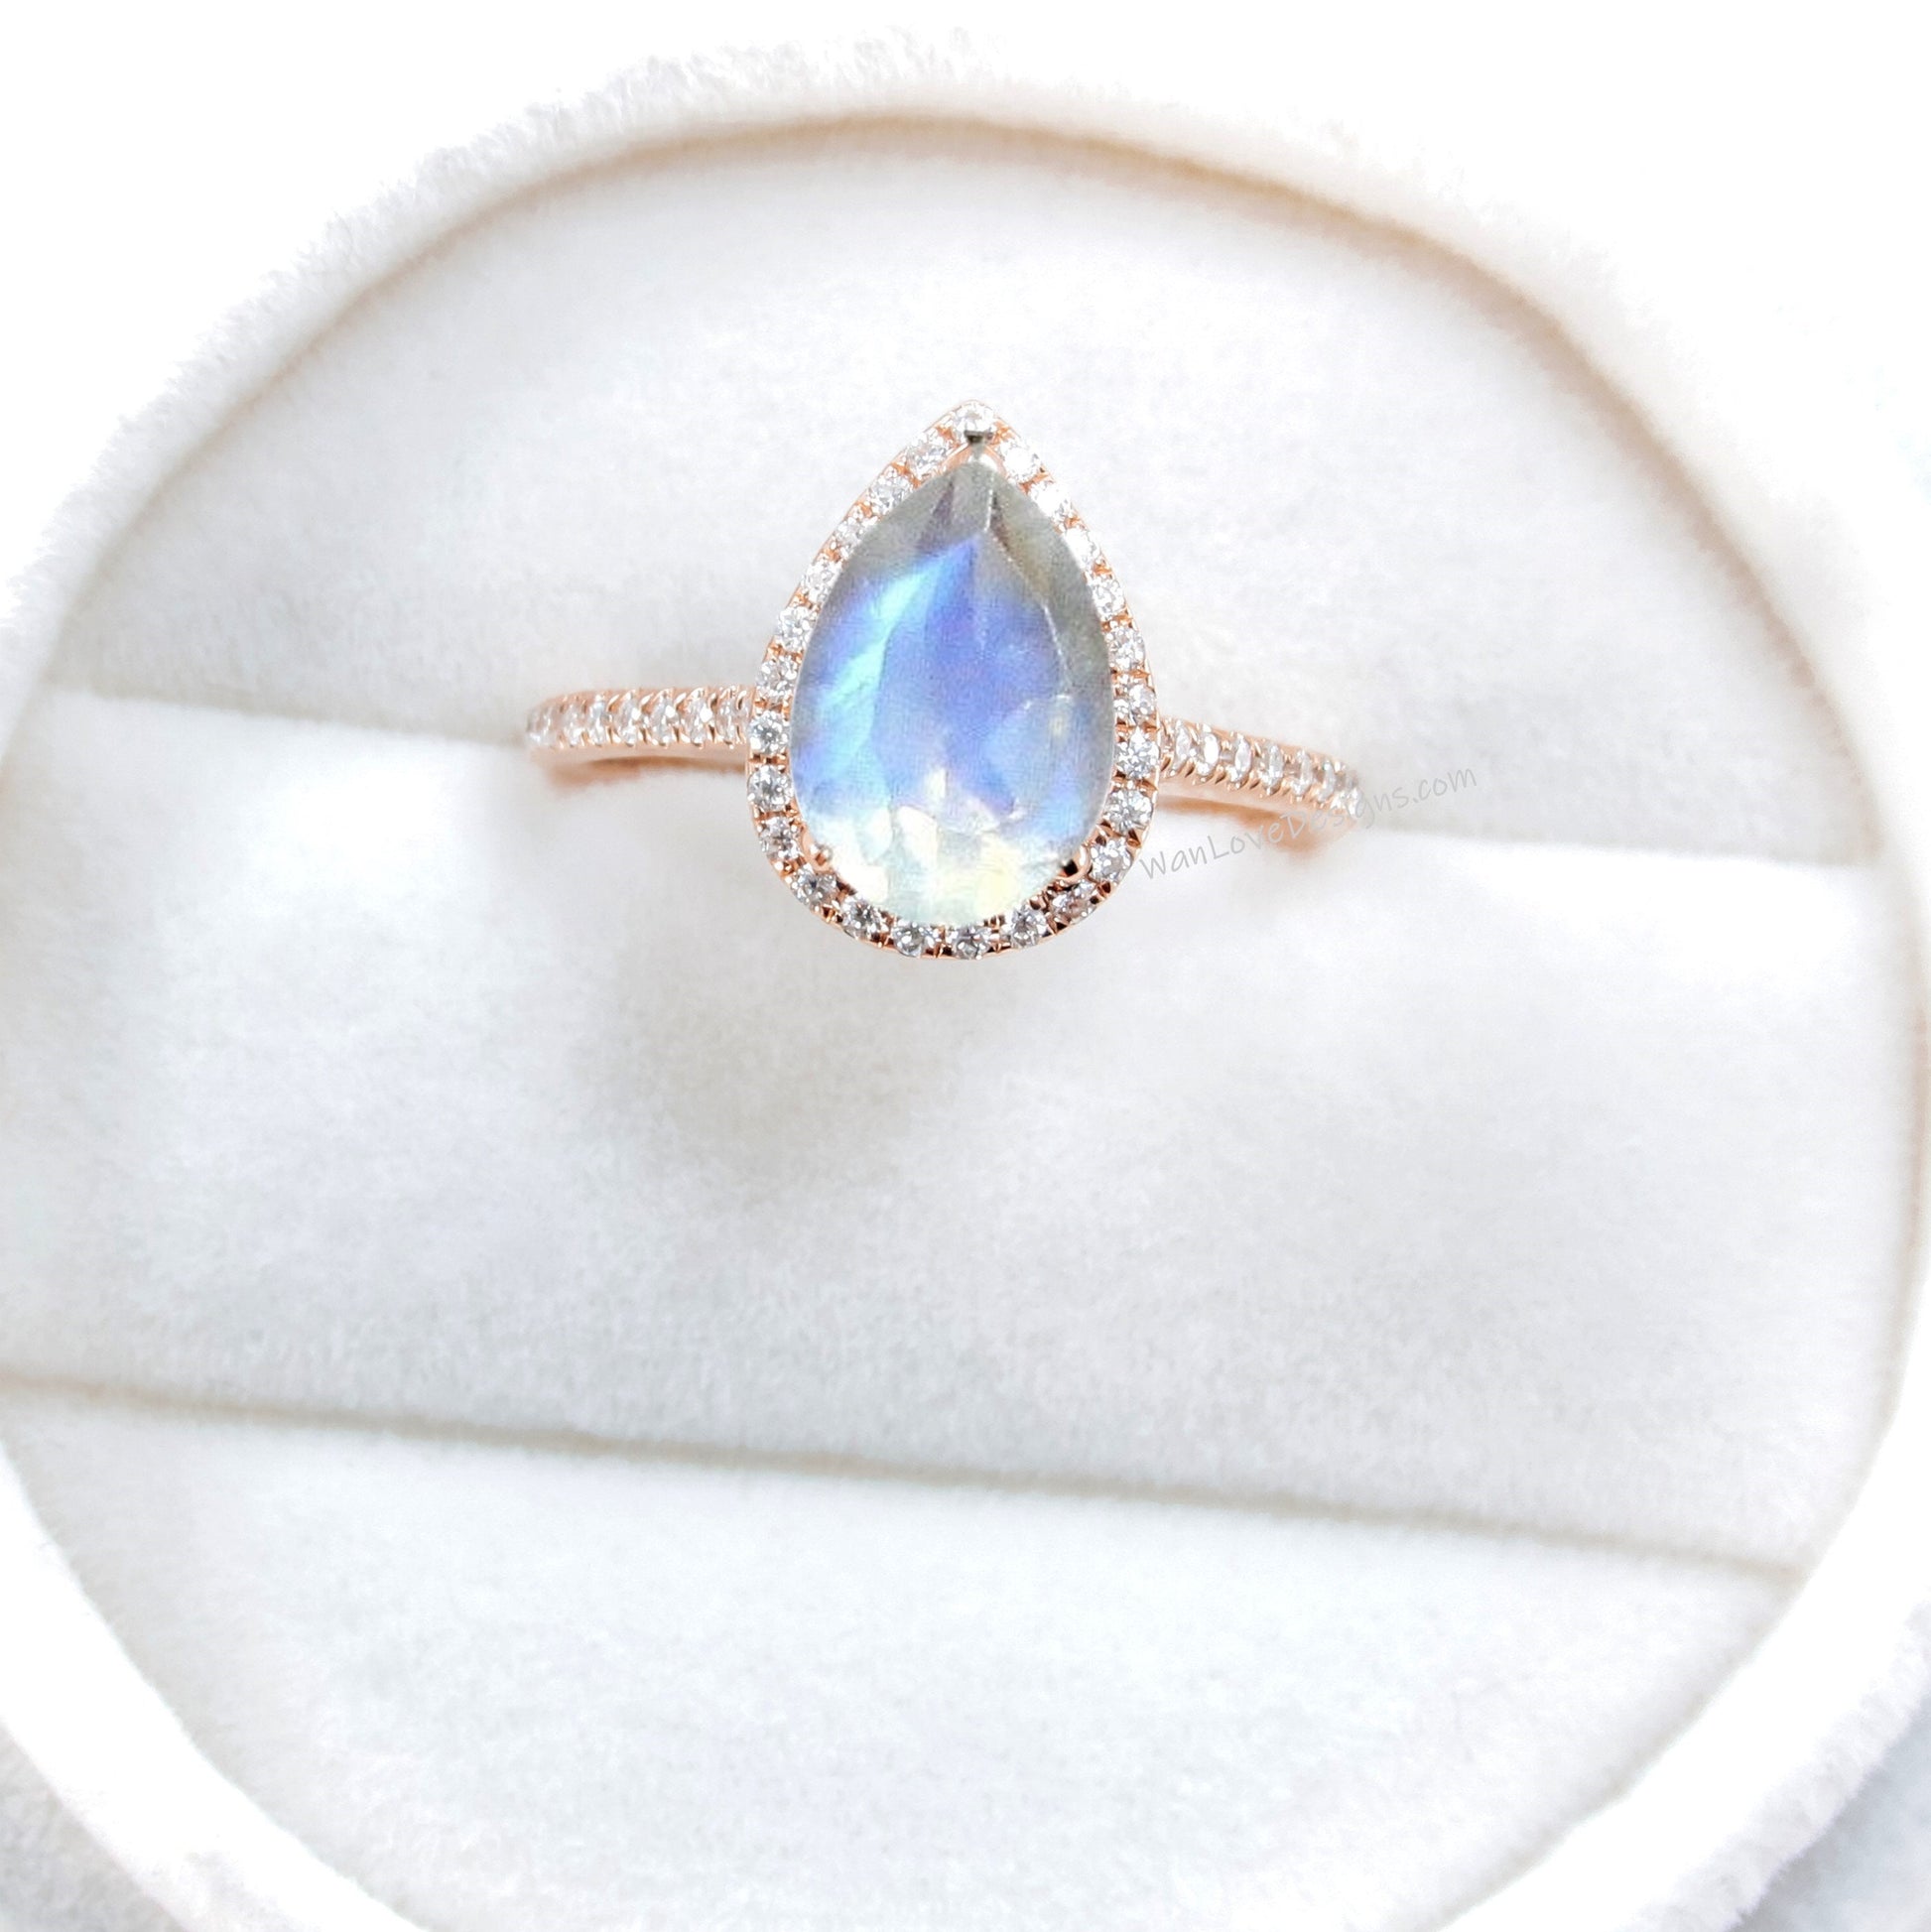 Vintage Pear shaped Moonstone Engagement Ring, Pear Cut Unique 14k Rose Gold Diamond Halo Ring, Wedding Ring Anniversary Ring Proposal Ring.